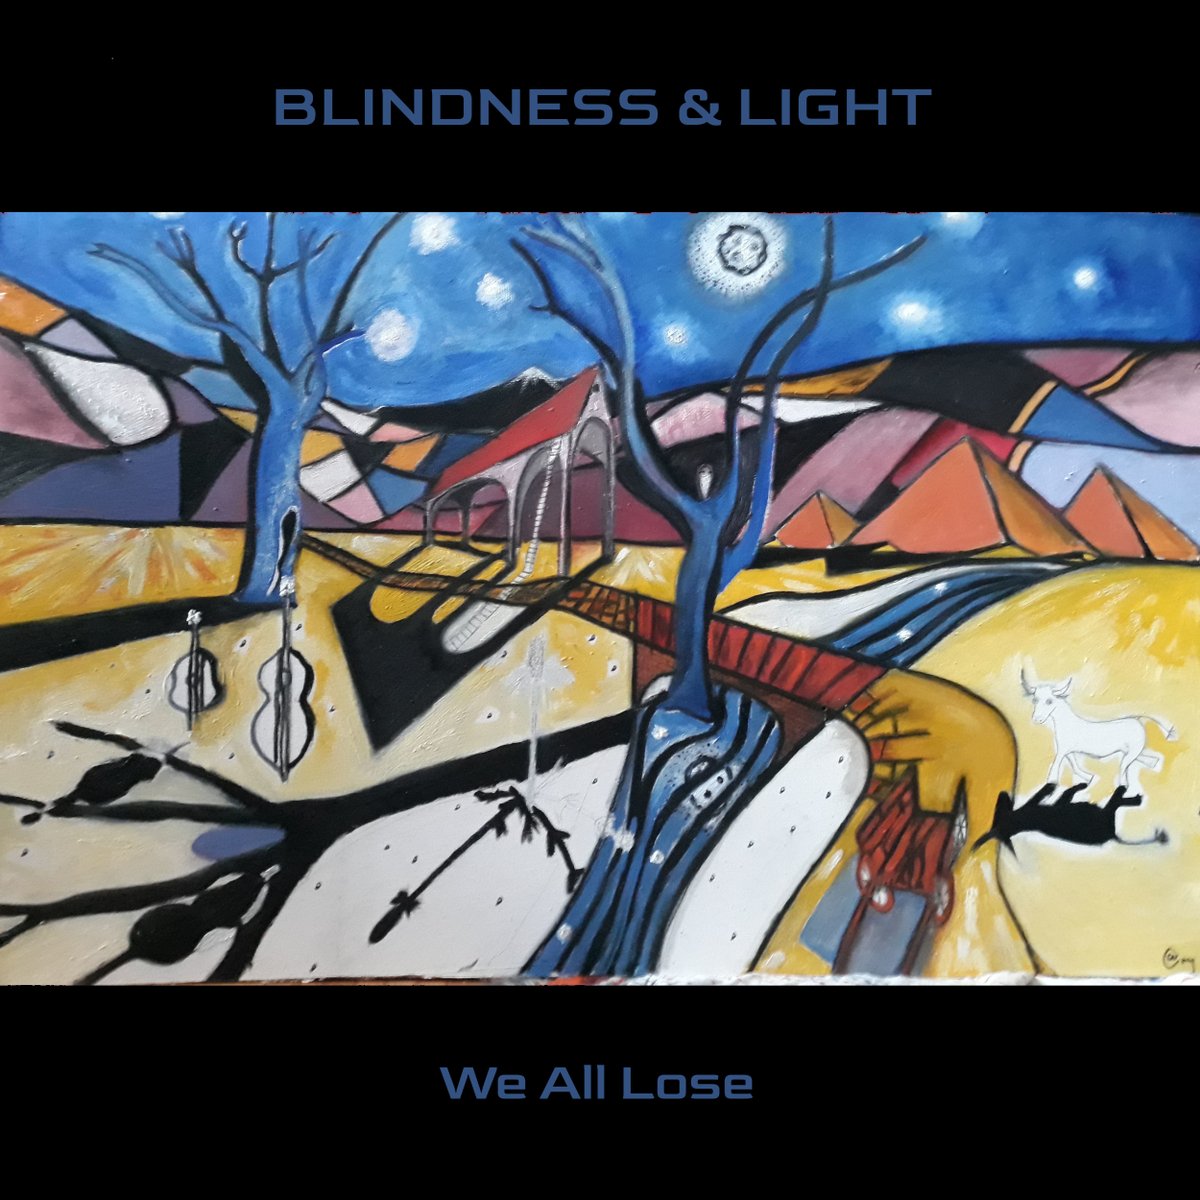 'We All Lose' by Blindness & Light is released today.... please stream, save, follow. Artwork by Austrian artist Gary Lanthaler, 'Der Schrei der Eule' , The Cry Of The Owl. open.spotify.com/album/01b0npJ3…